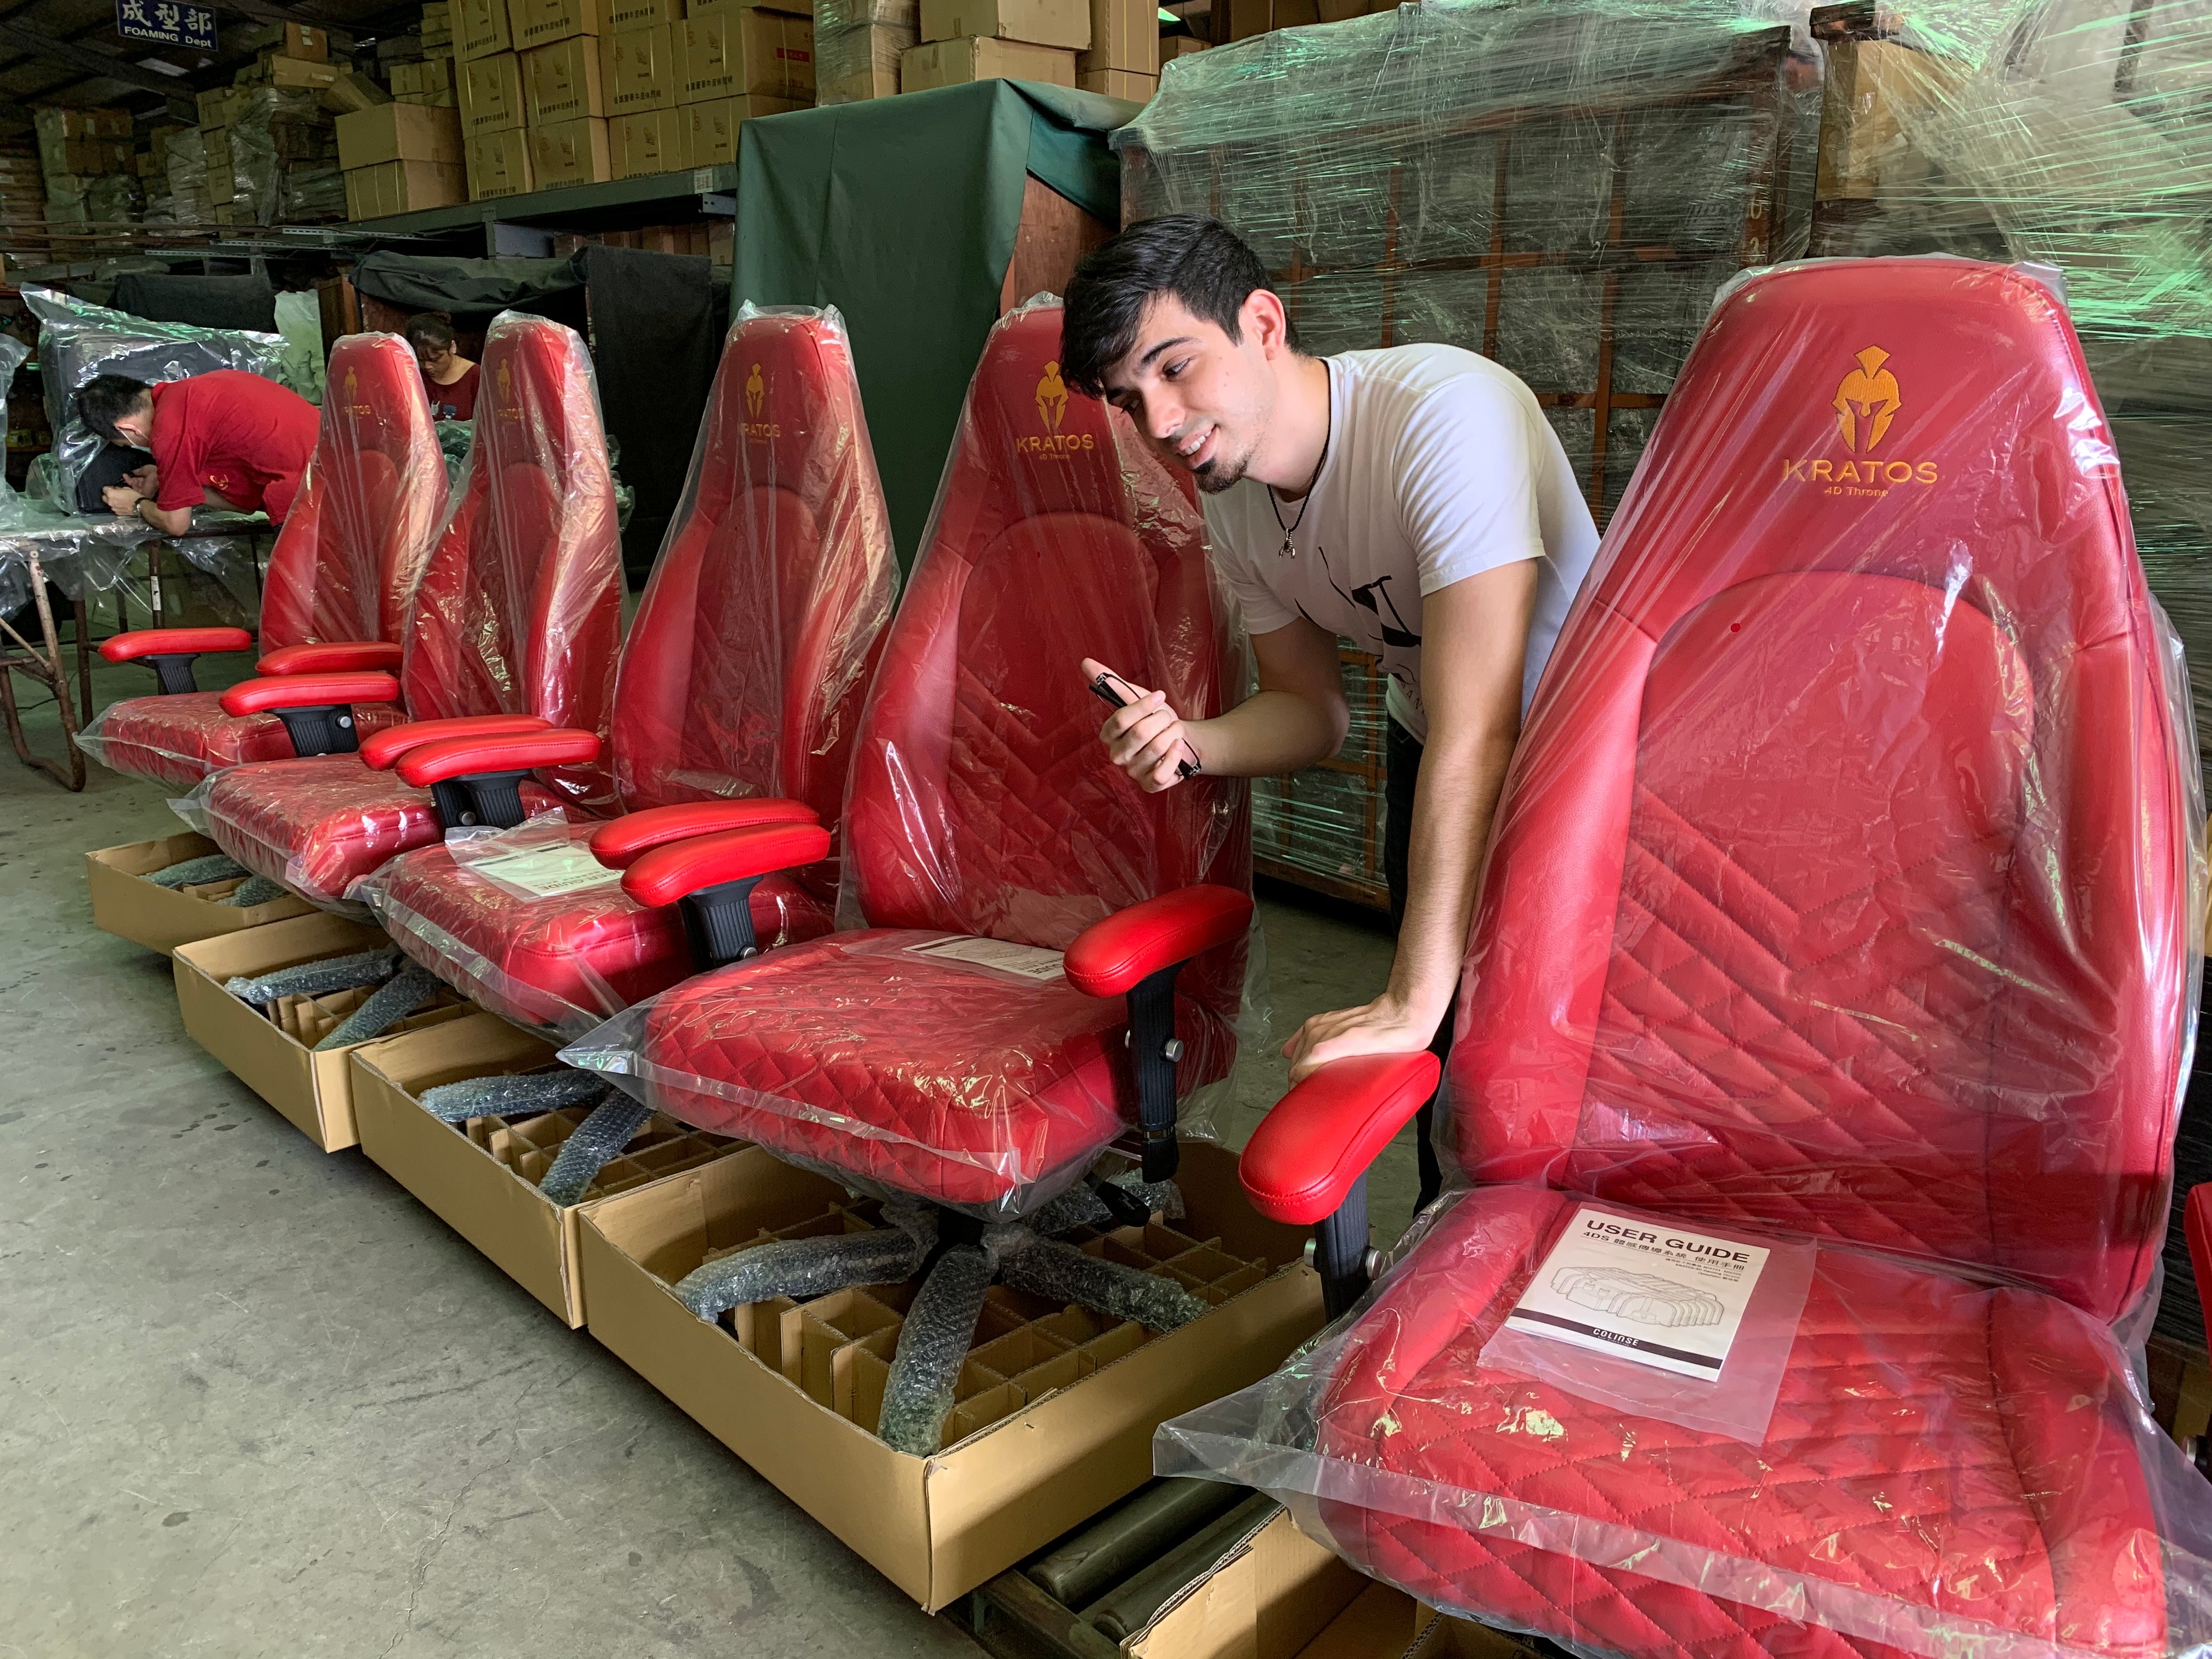 Carlos Fernandez CO-Founder of Kratos Haptic Gaming Chairs with 5 Red Gaming chairs next to him